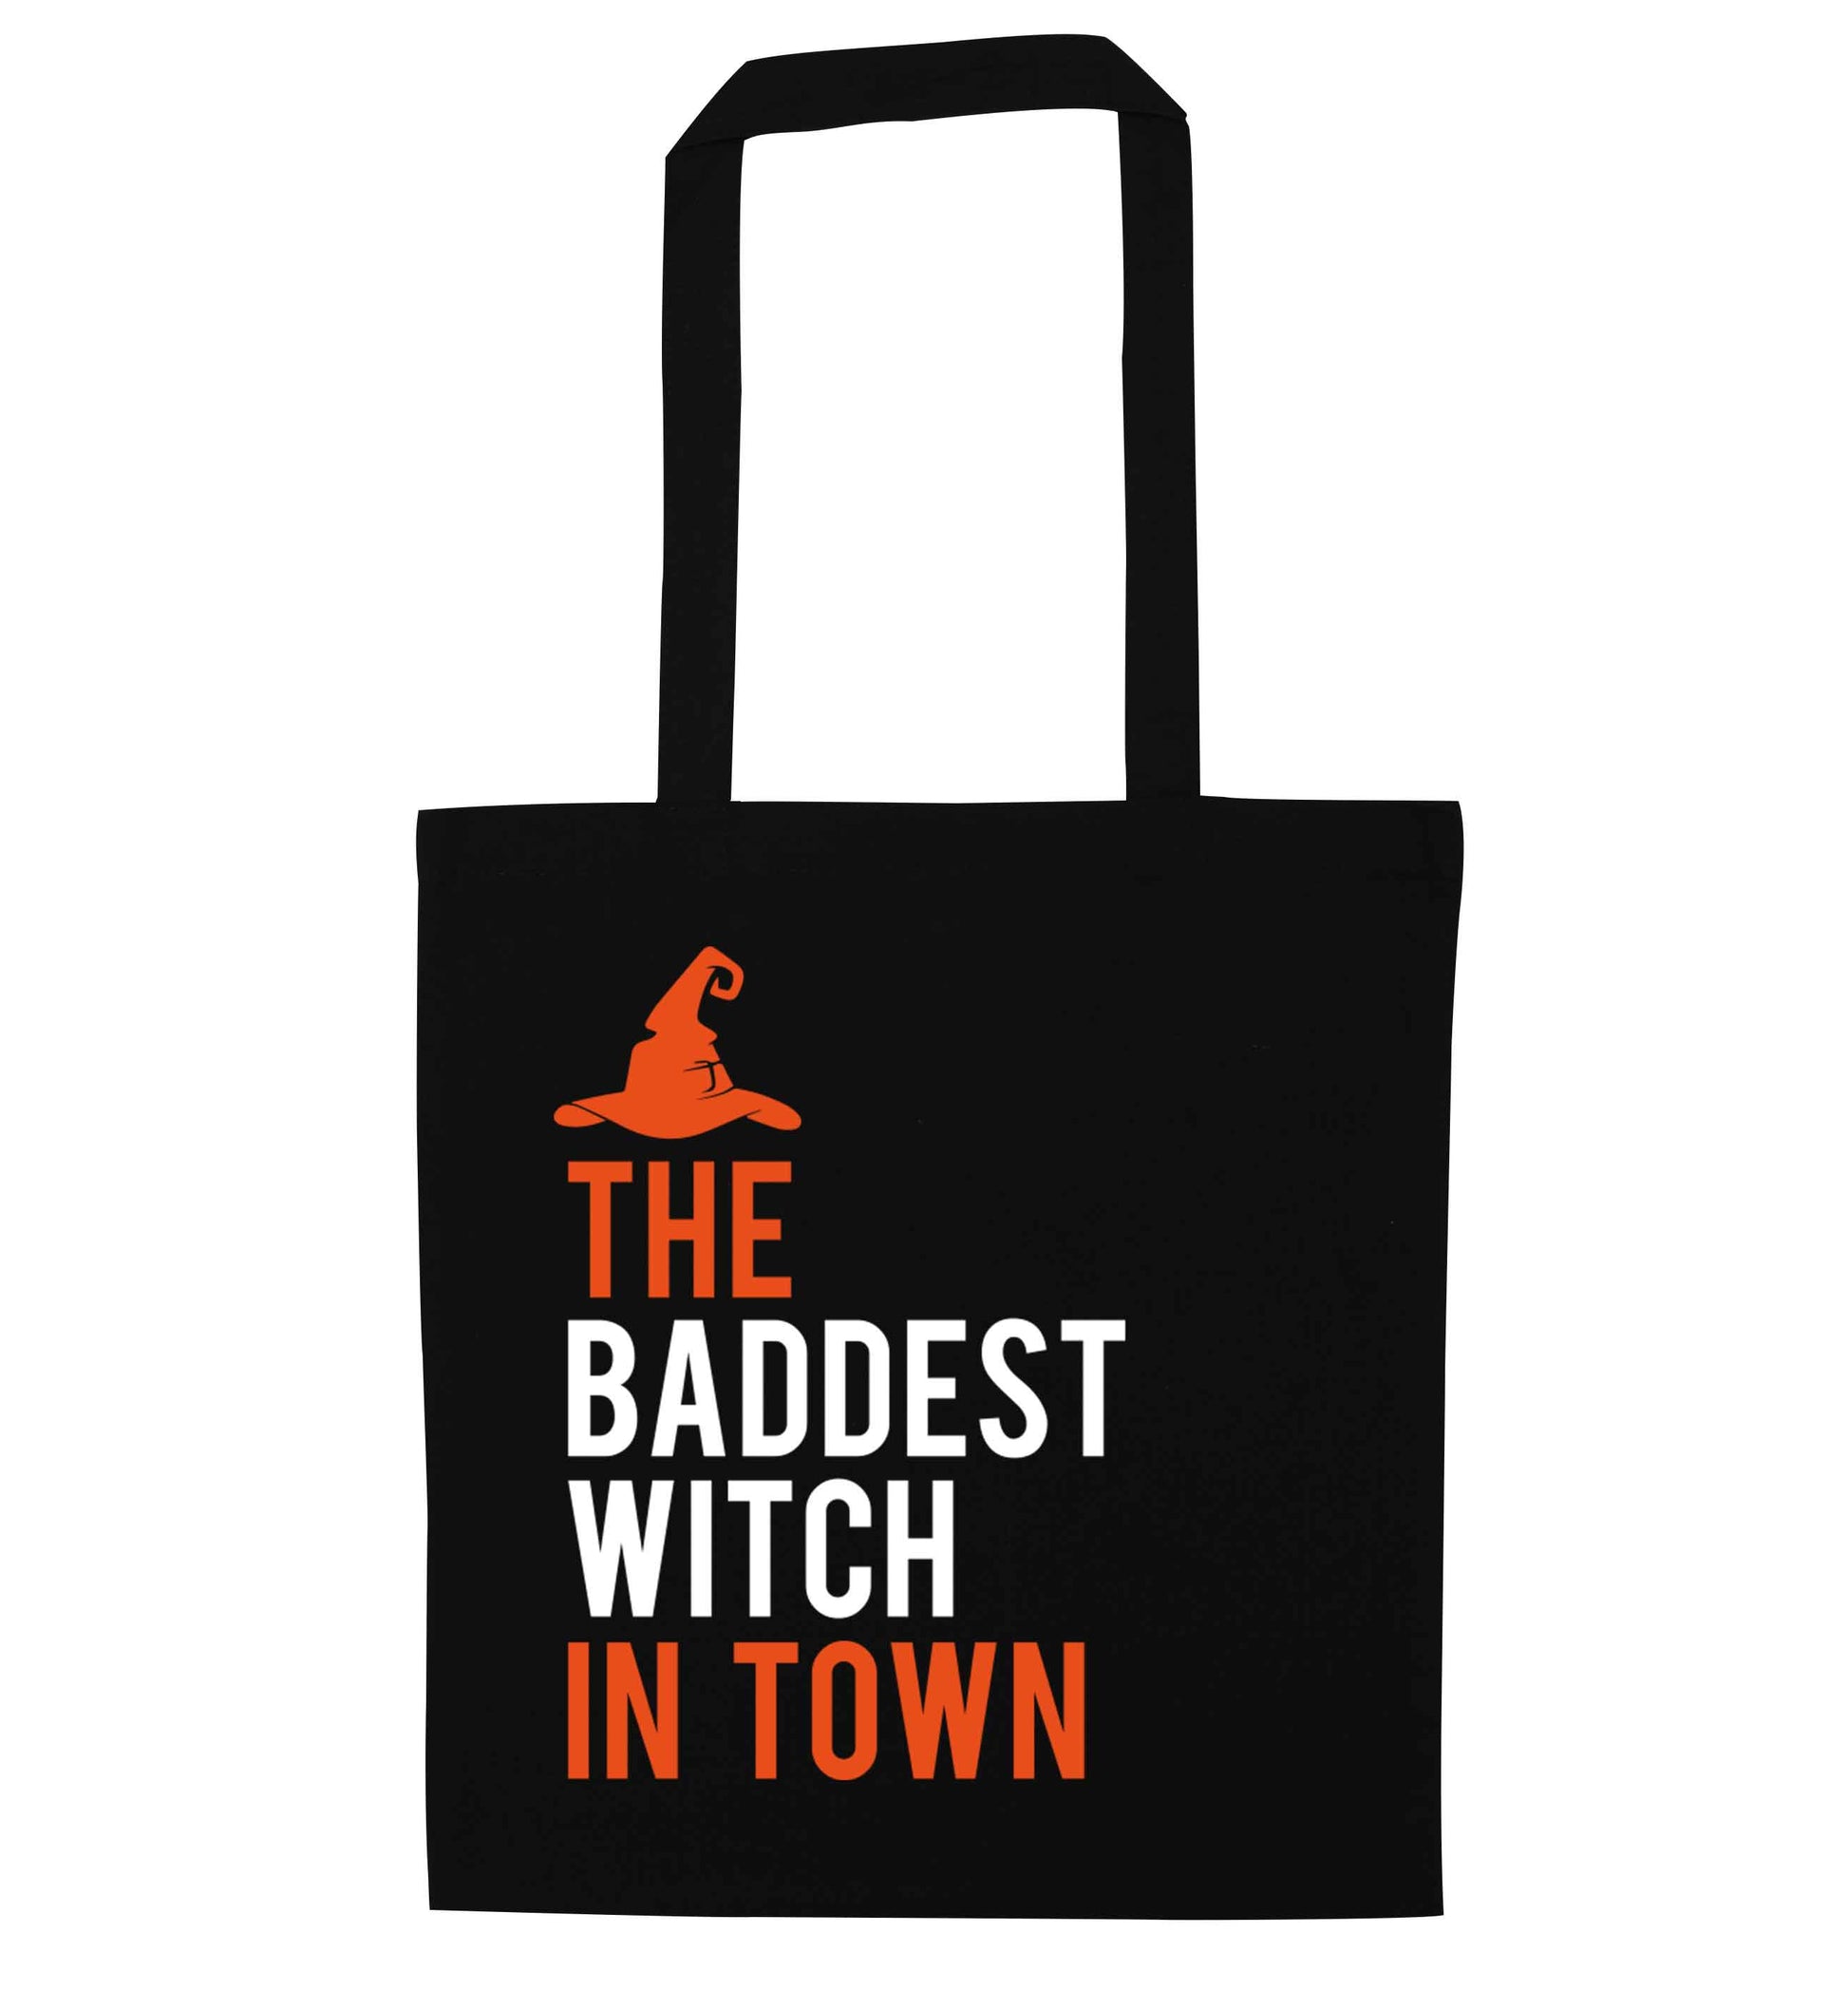 Badest witch in town black tote bag